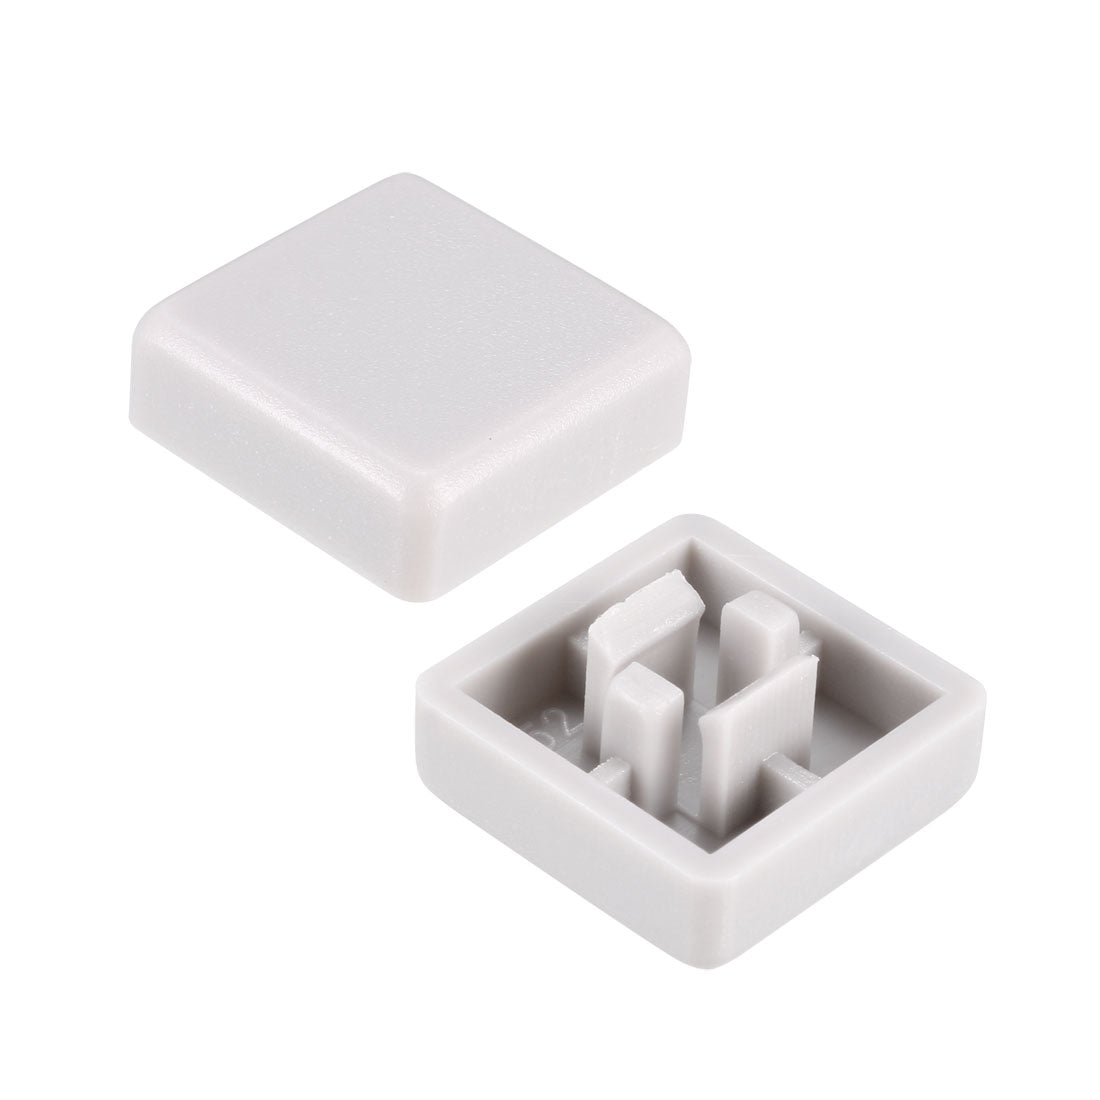 uxcell Uxcell 20Pcs Plastic 12x12mm Pushbutton Tactile Switch Caps Cover Keycaps Grey for 12x12x7.3mm Tact Switch